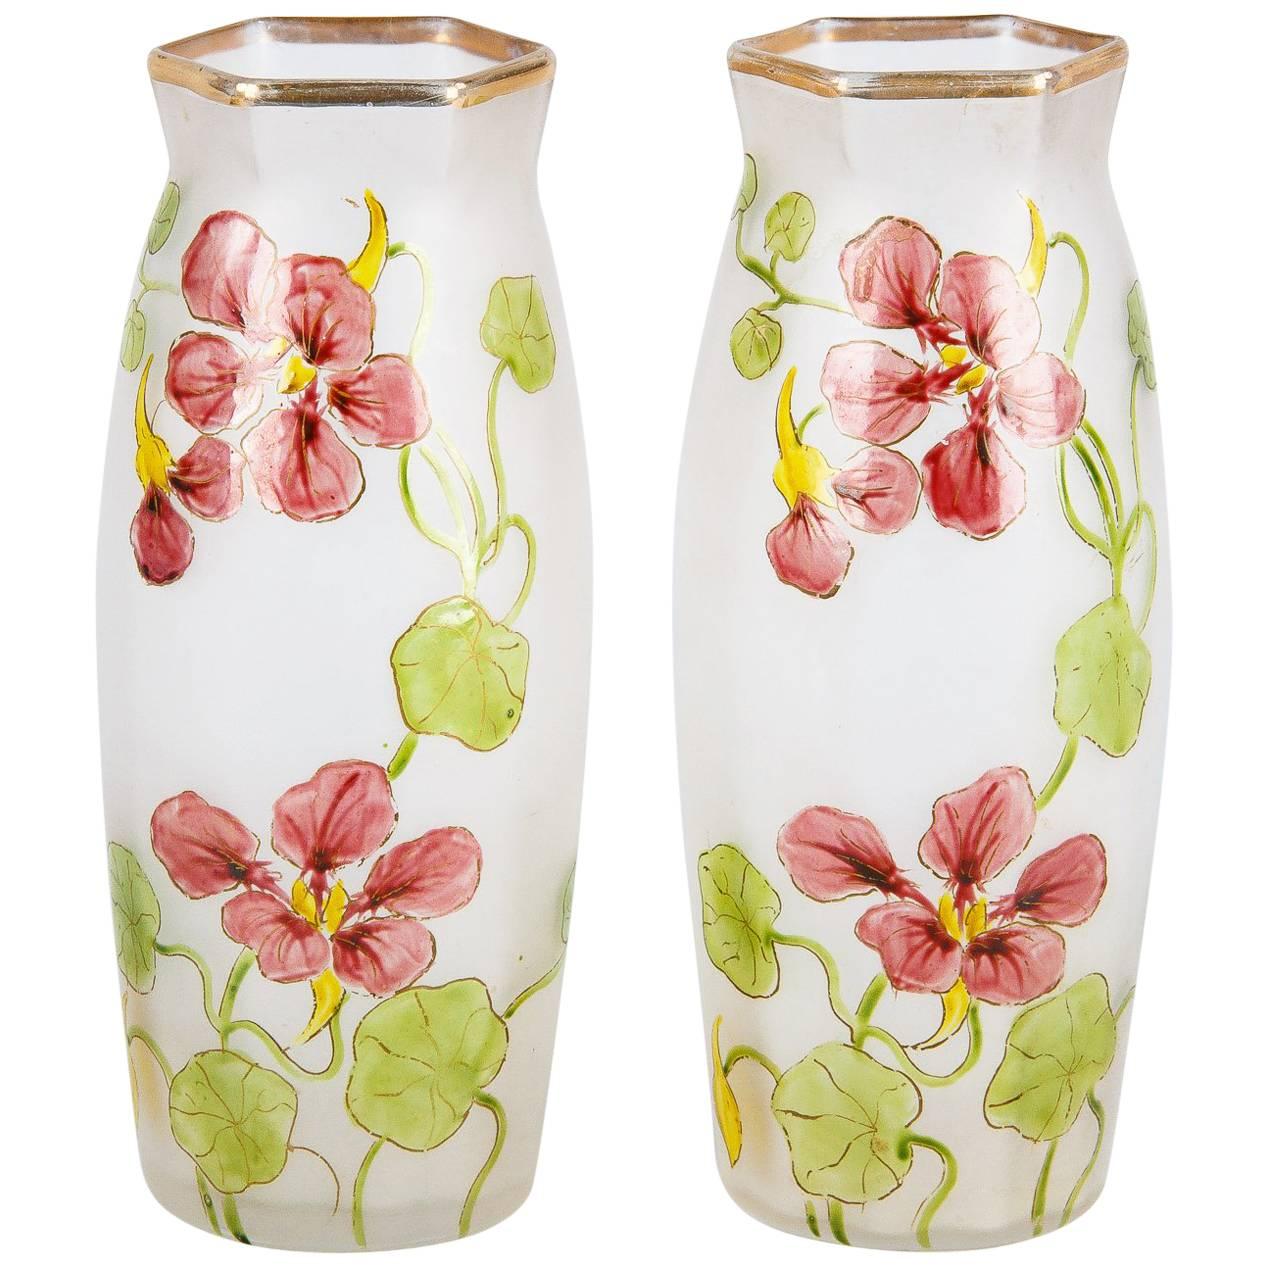 Pair of Hand-Painted French Art Nouveau Glass Vases, 1900s